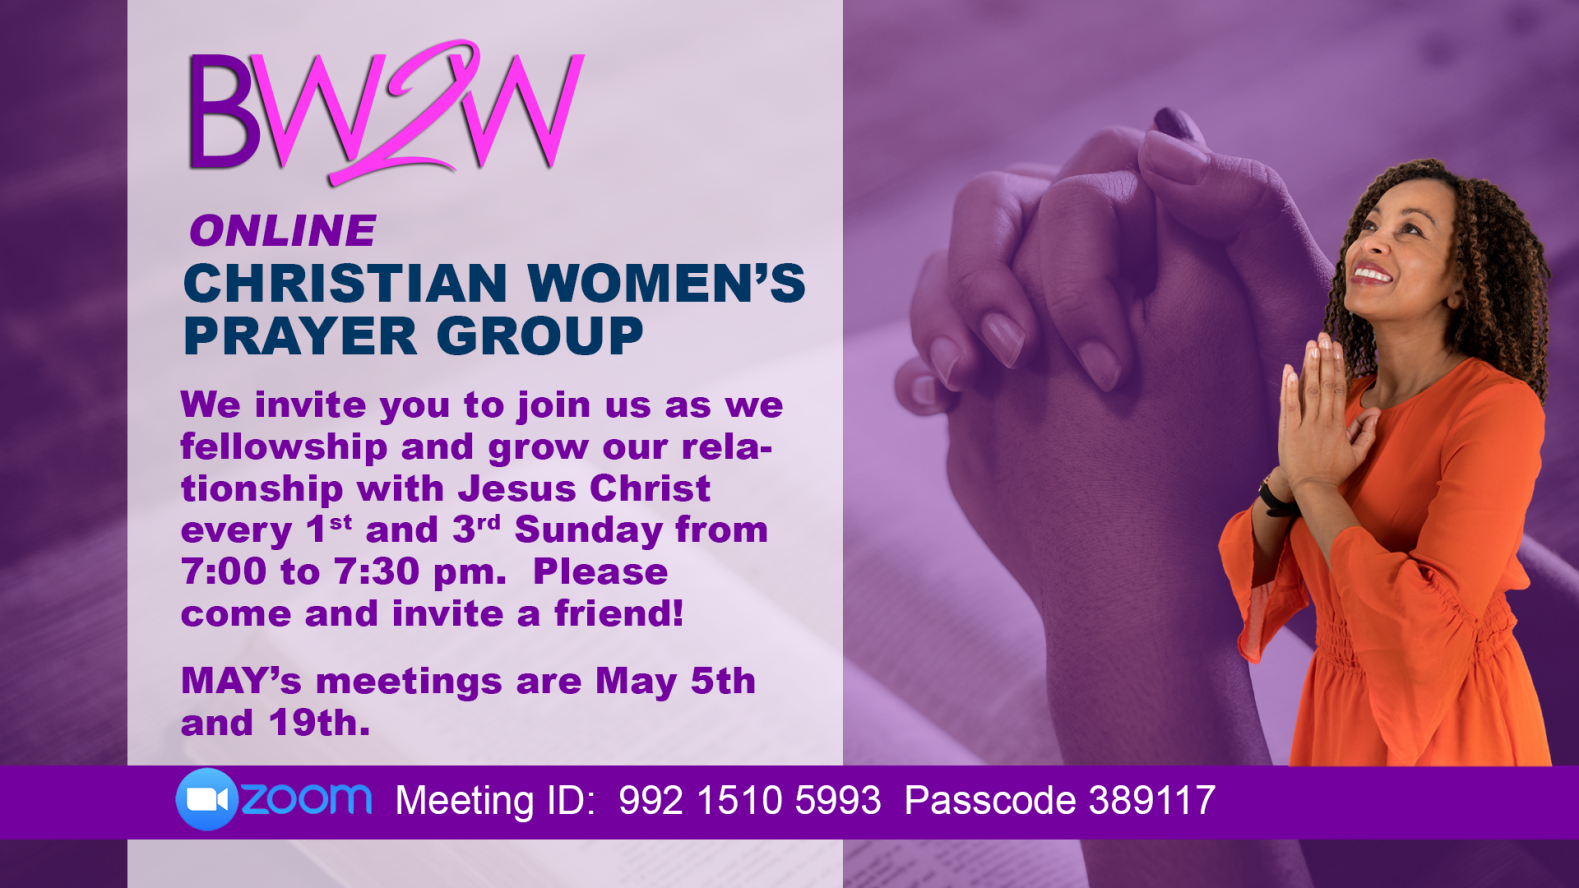 BW2W Online Christian Women's Prayer Group | Sunday May 5th and 19th